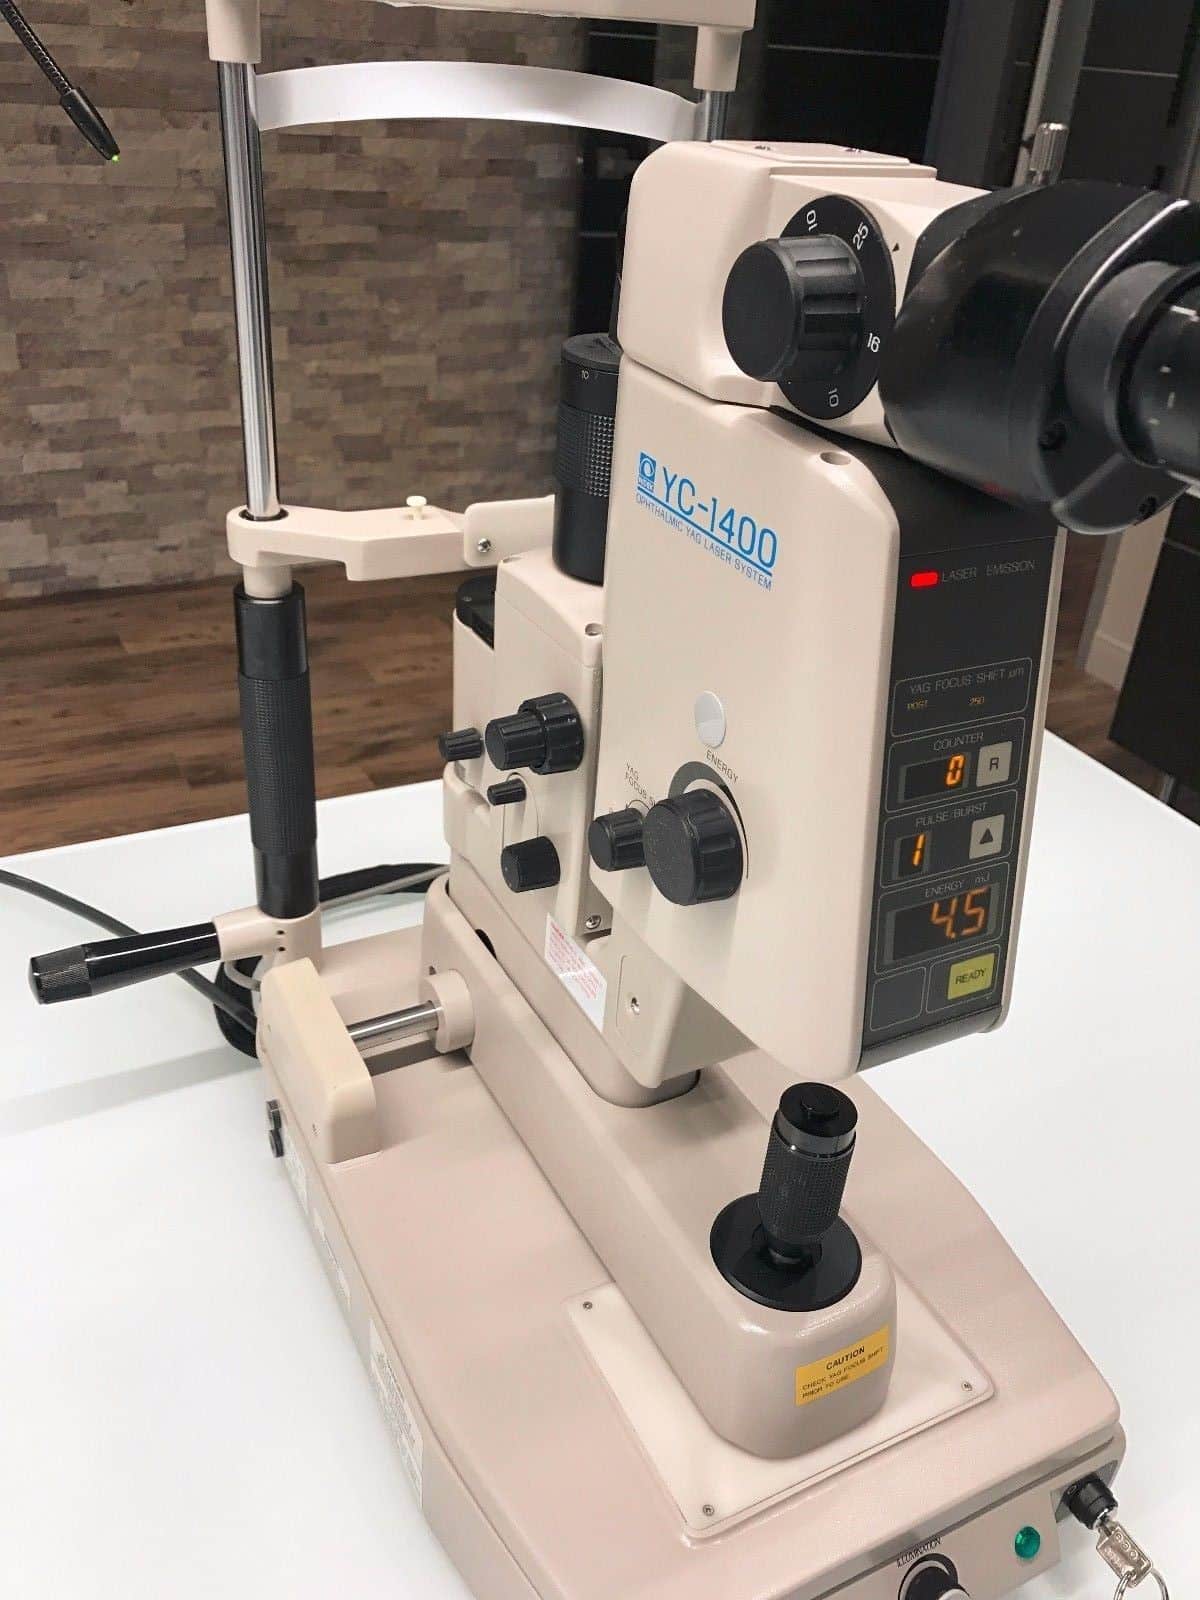 Nidek YC 1400 for sale Lumenis Selecta DUET SLT and Yag Combo Laser with Power Table